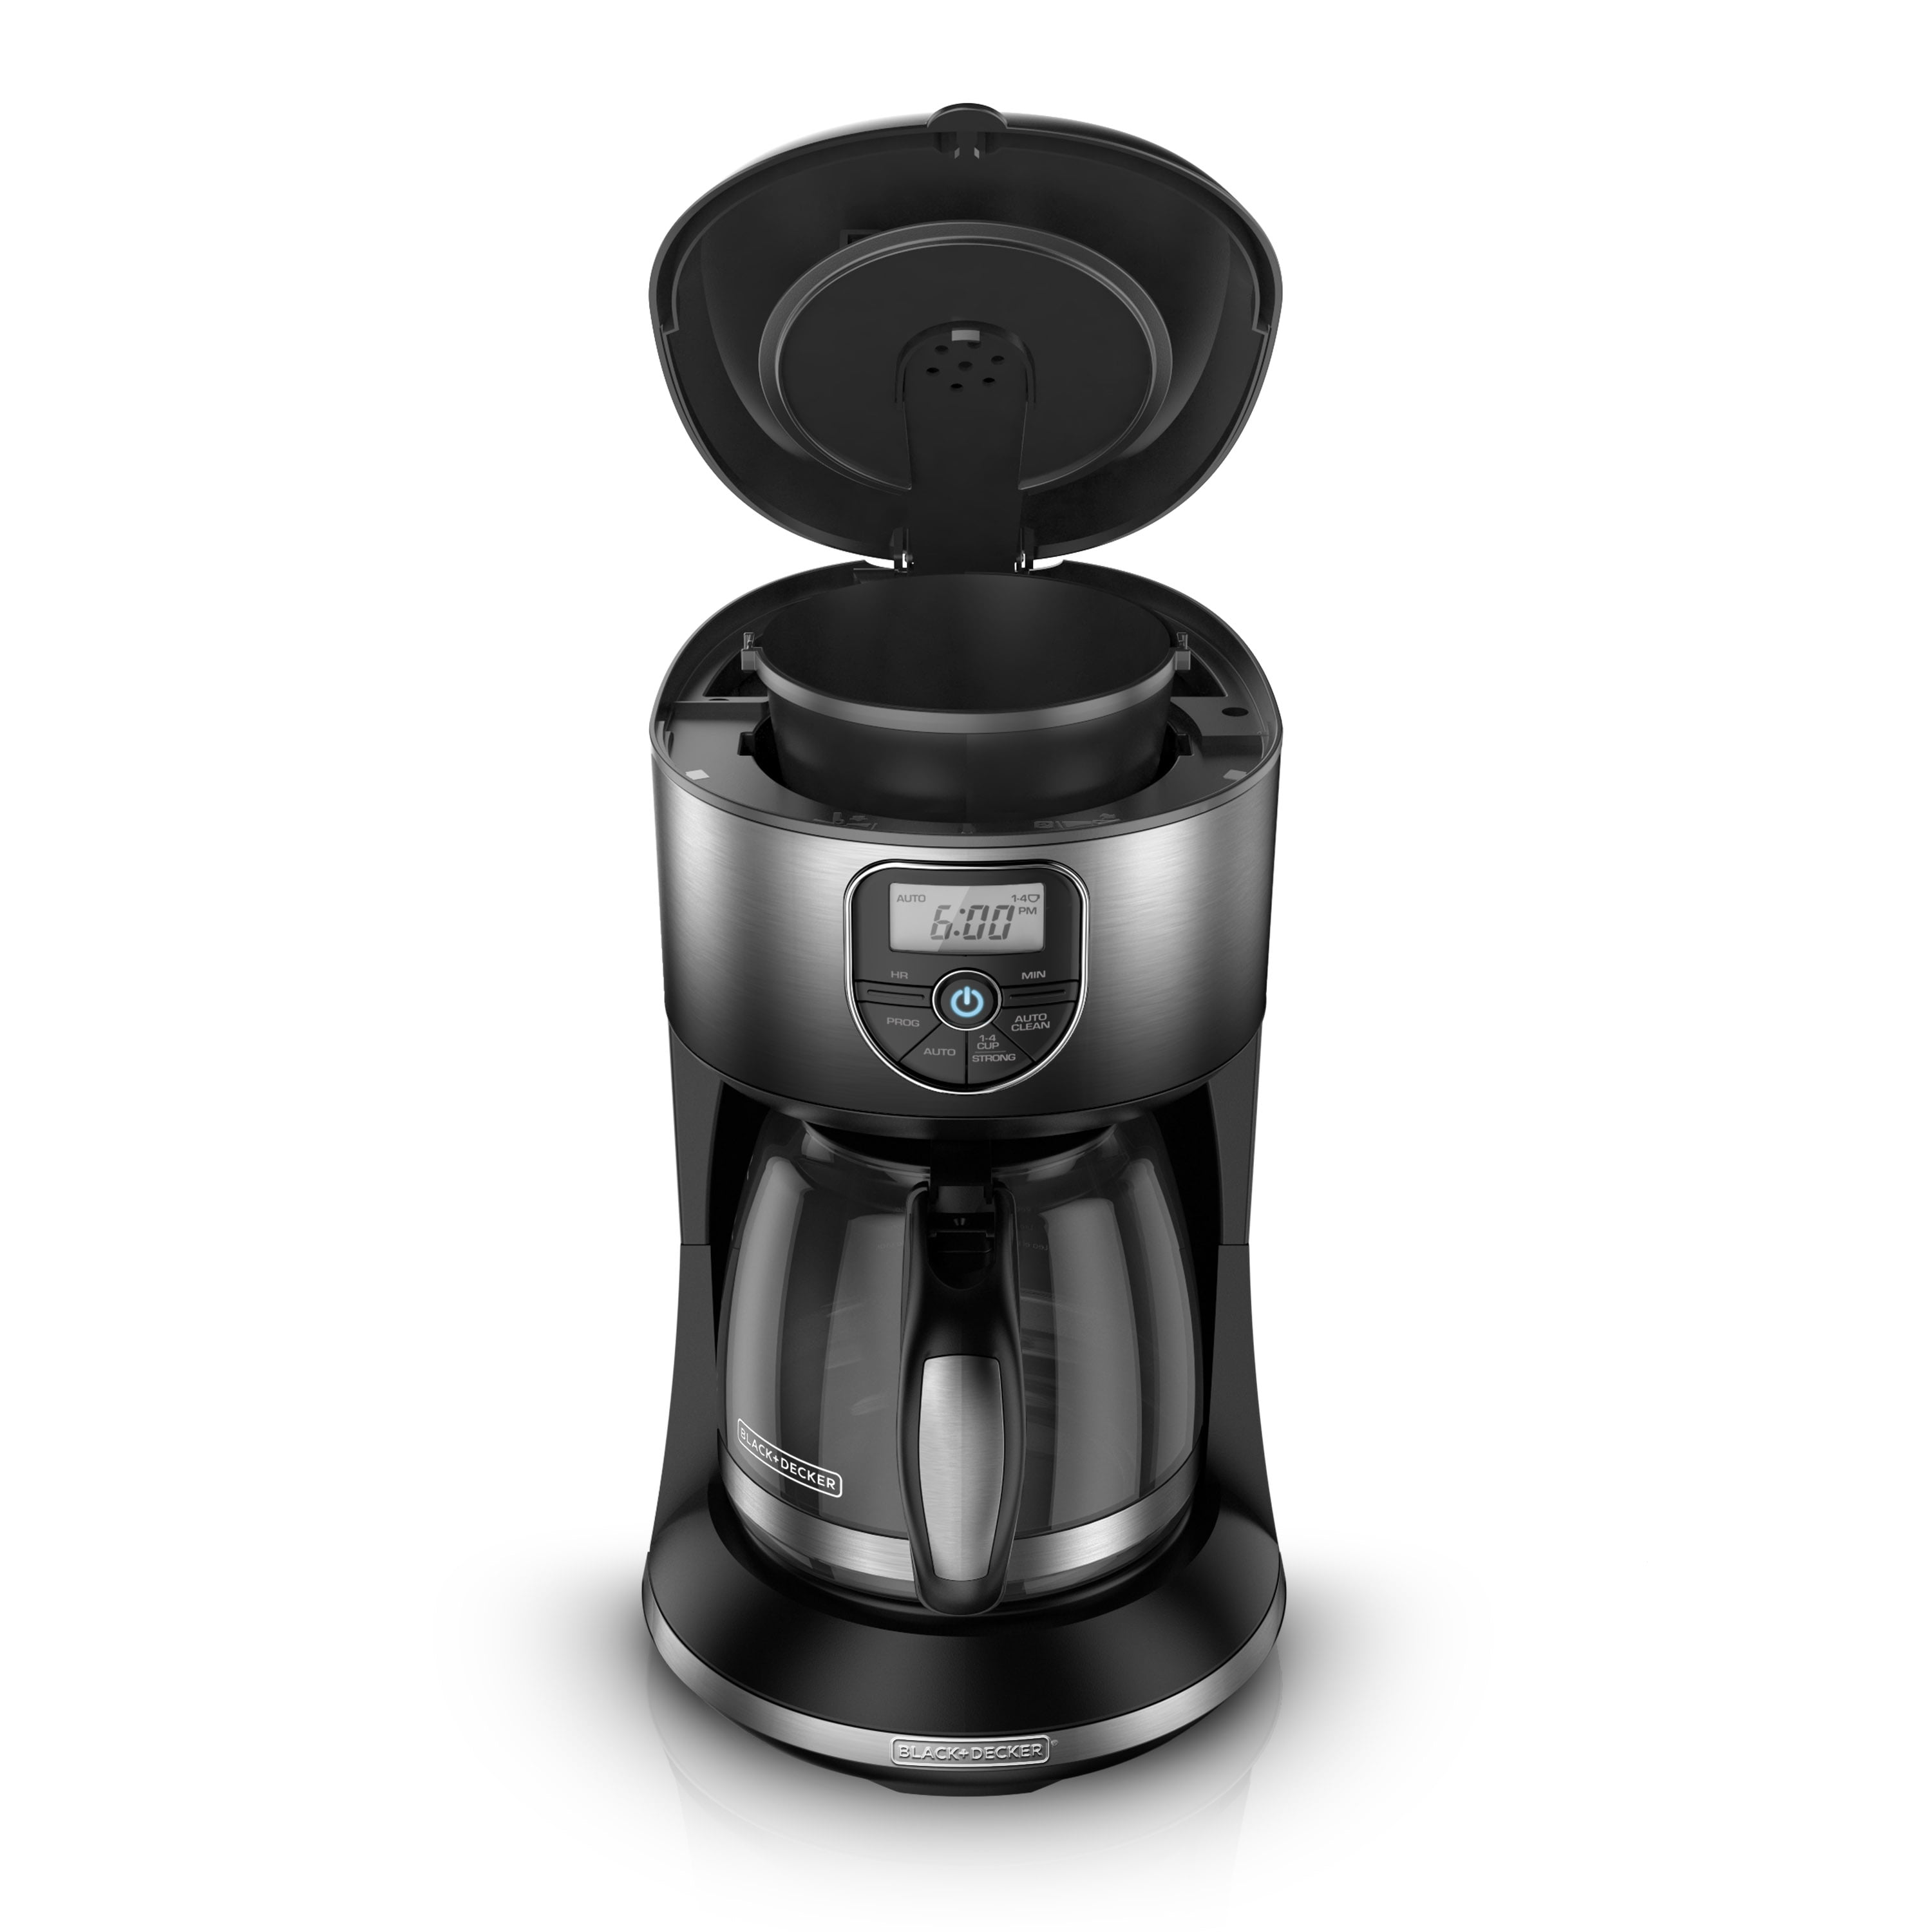 Two coffemakers in one: BLACK + DECKER Café Select Dual Brew Coffeemaker  with Travel Mug - Rave & Review